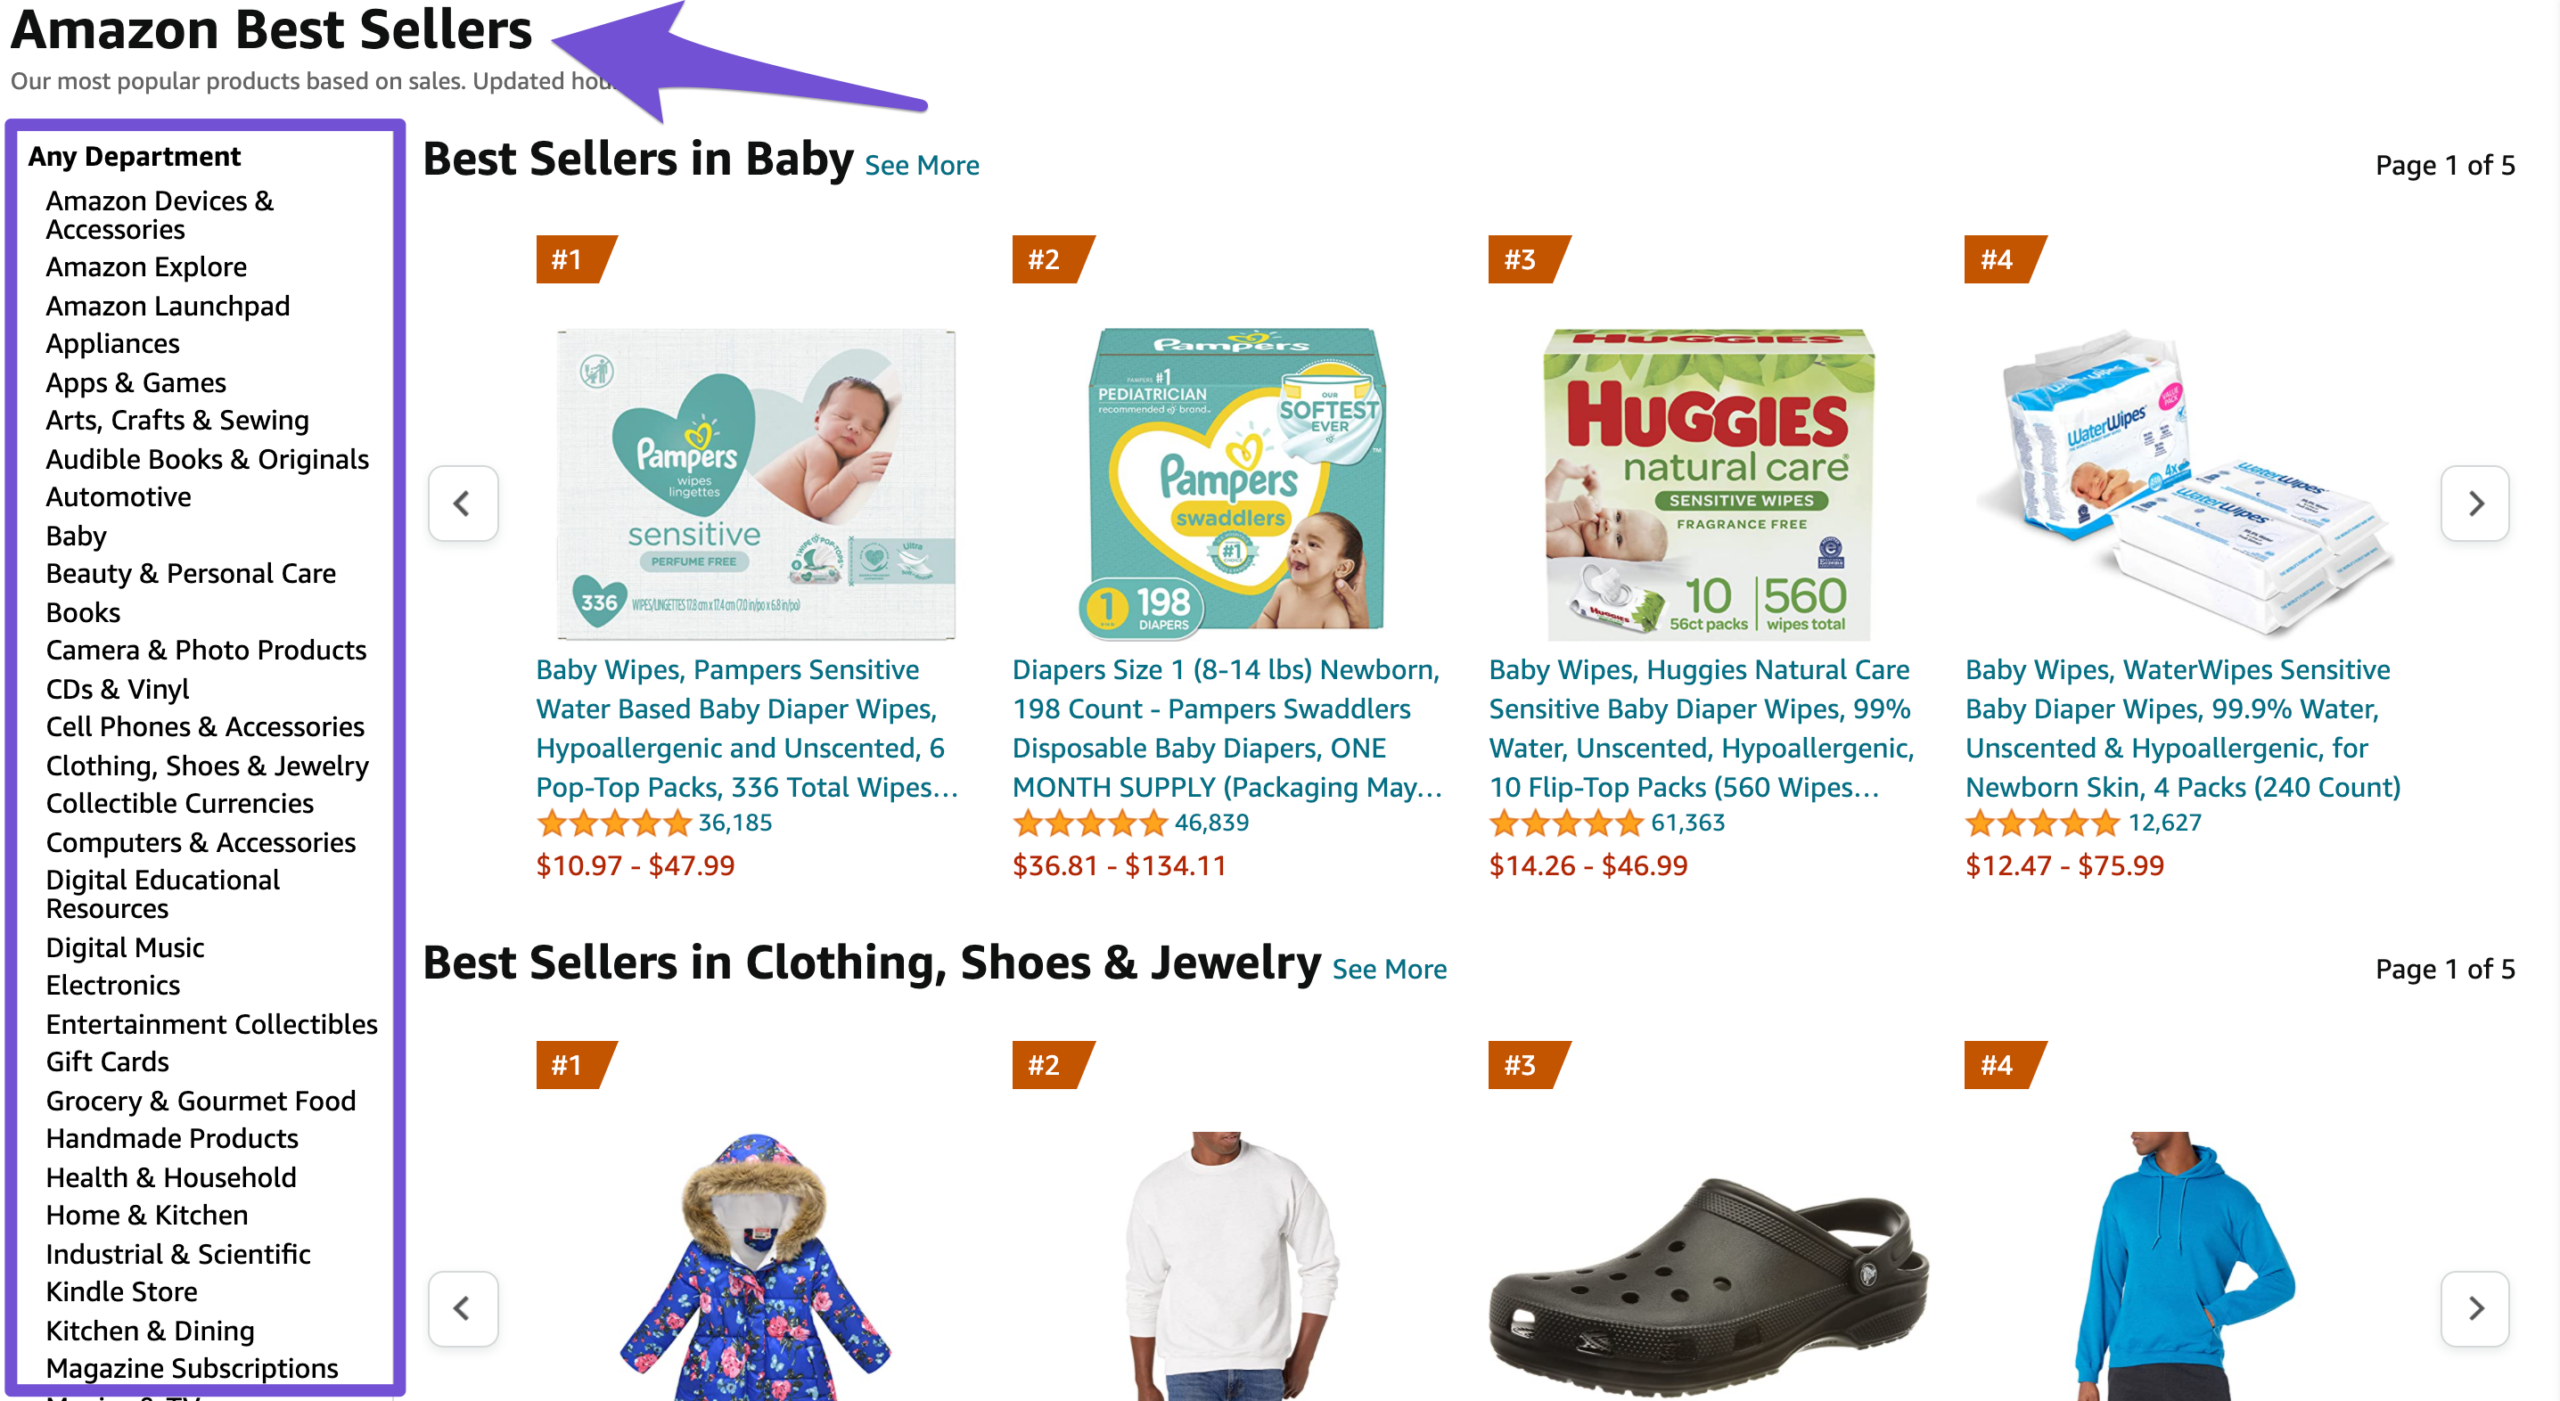 amazon website sidebar containing all best seller categories